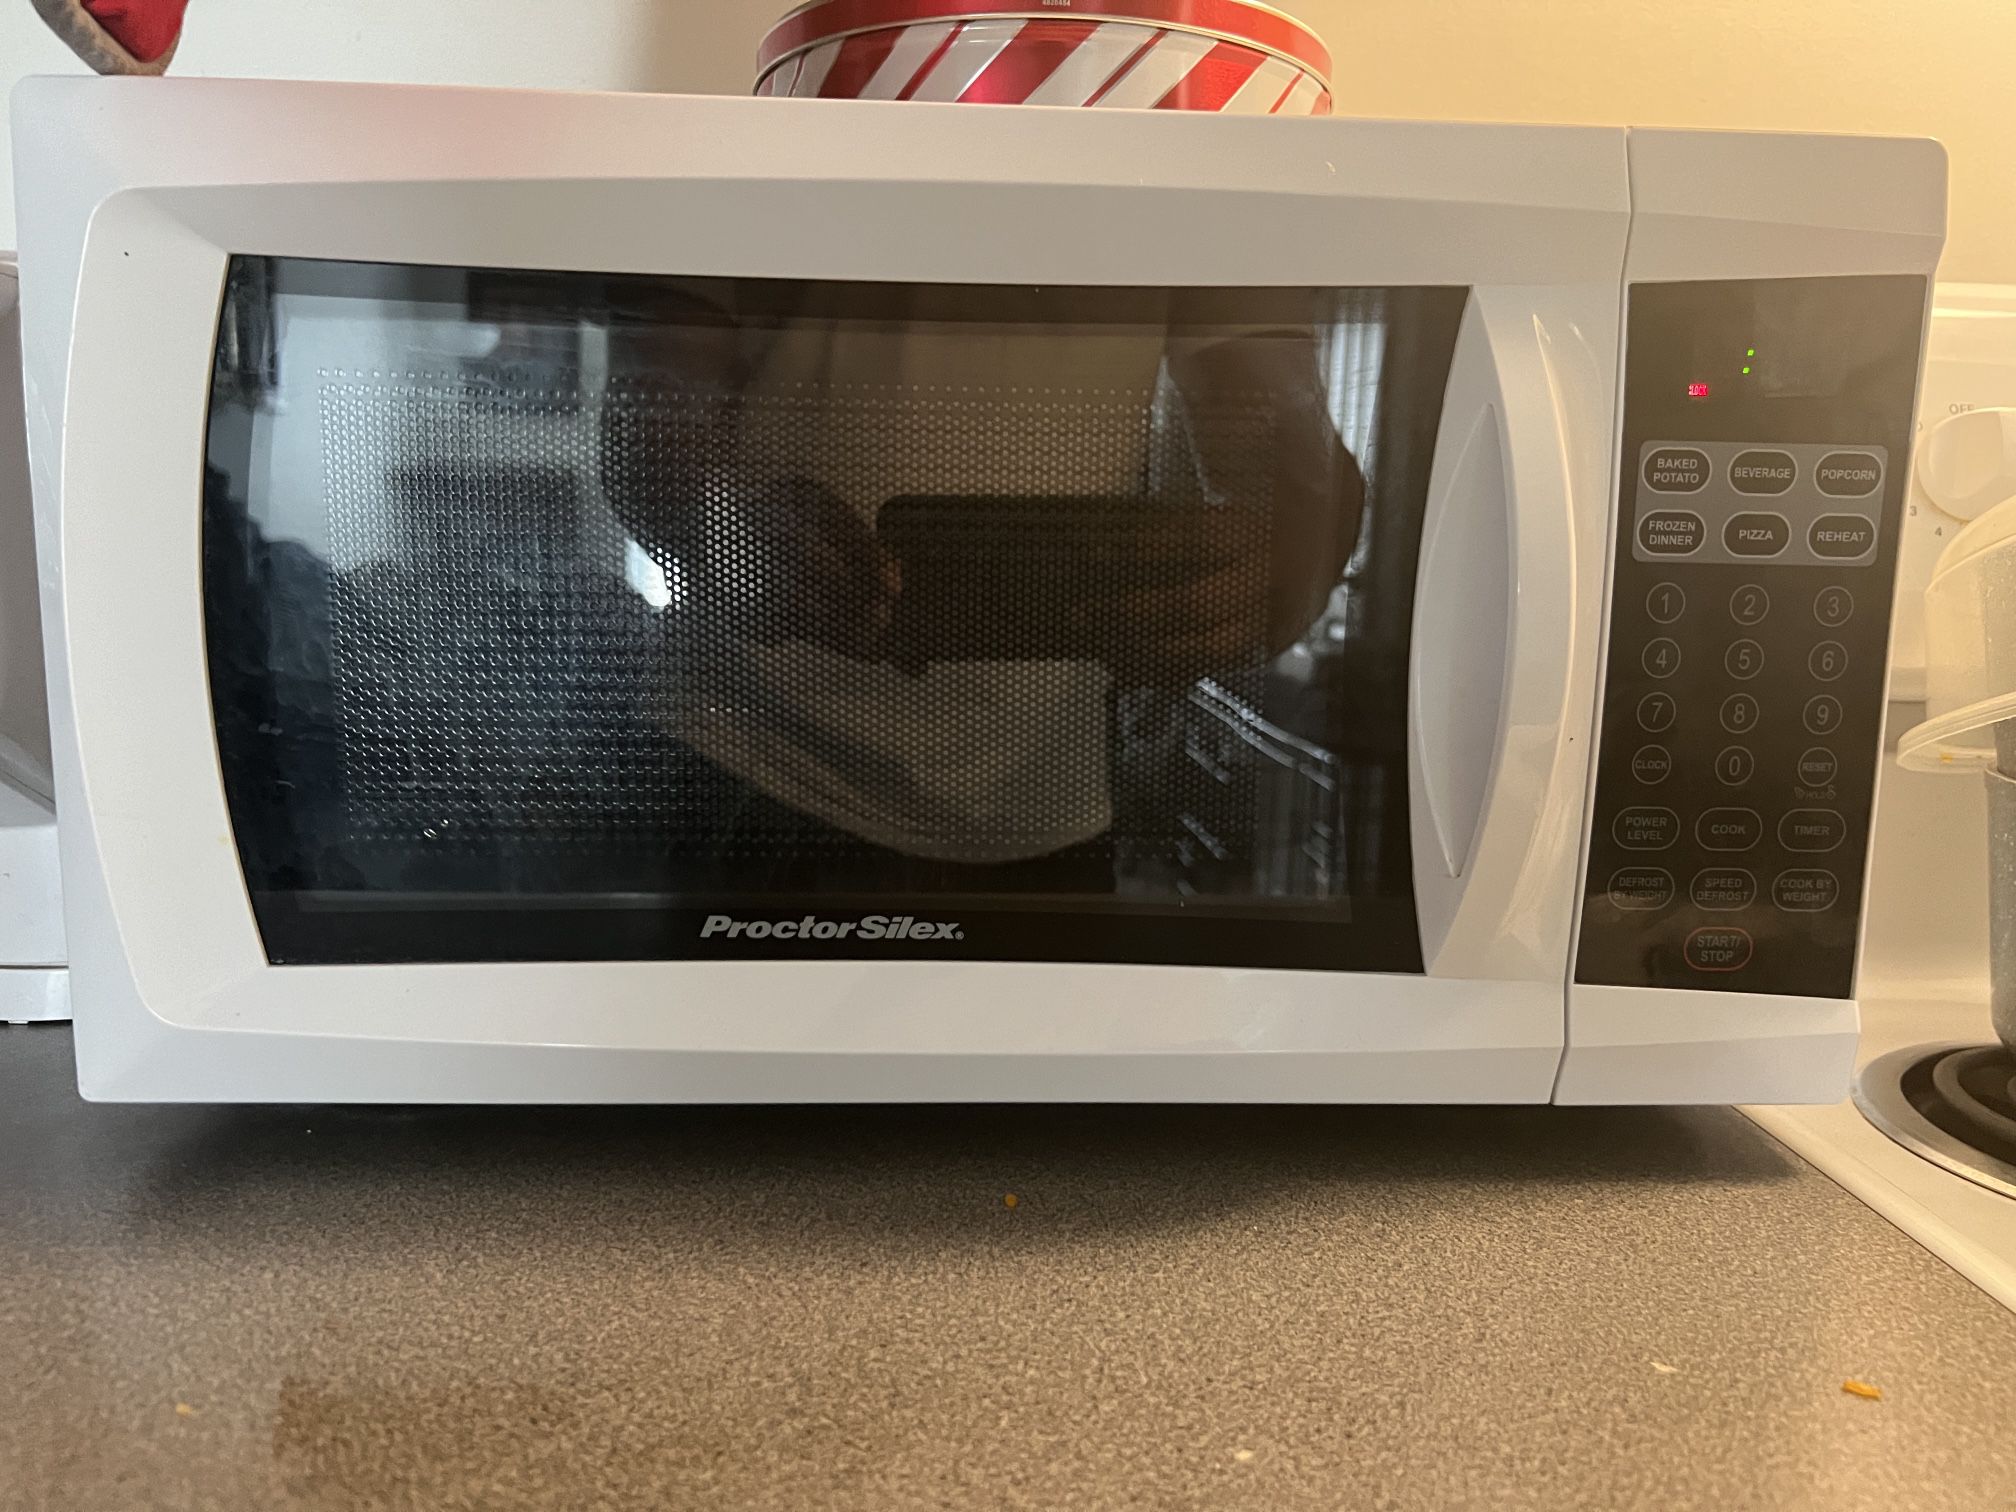 Proctor Silex 700w Microwave Oven